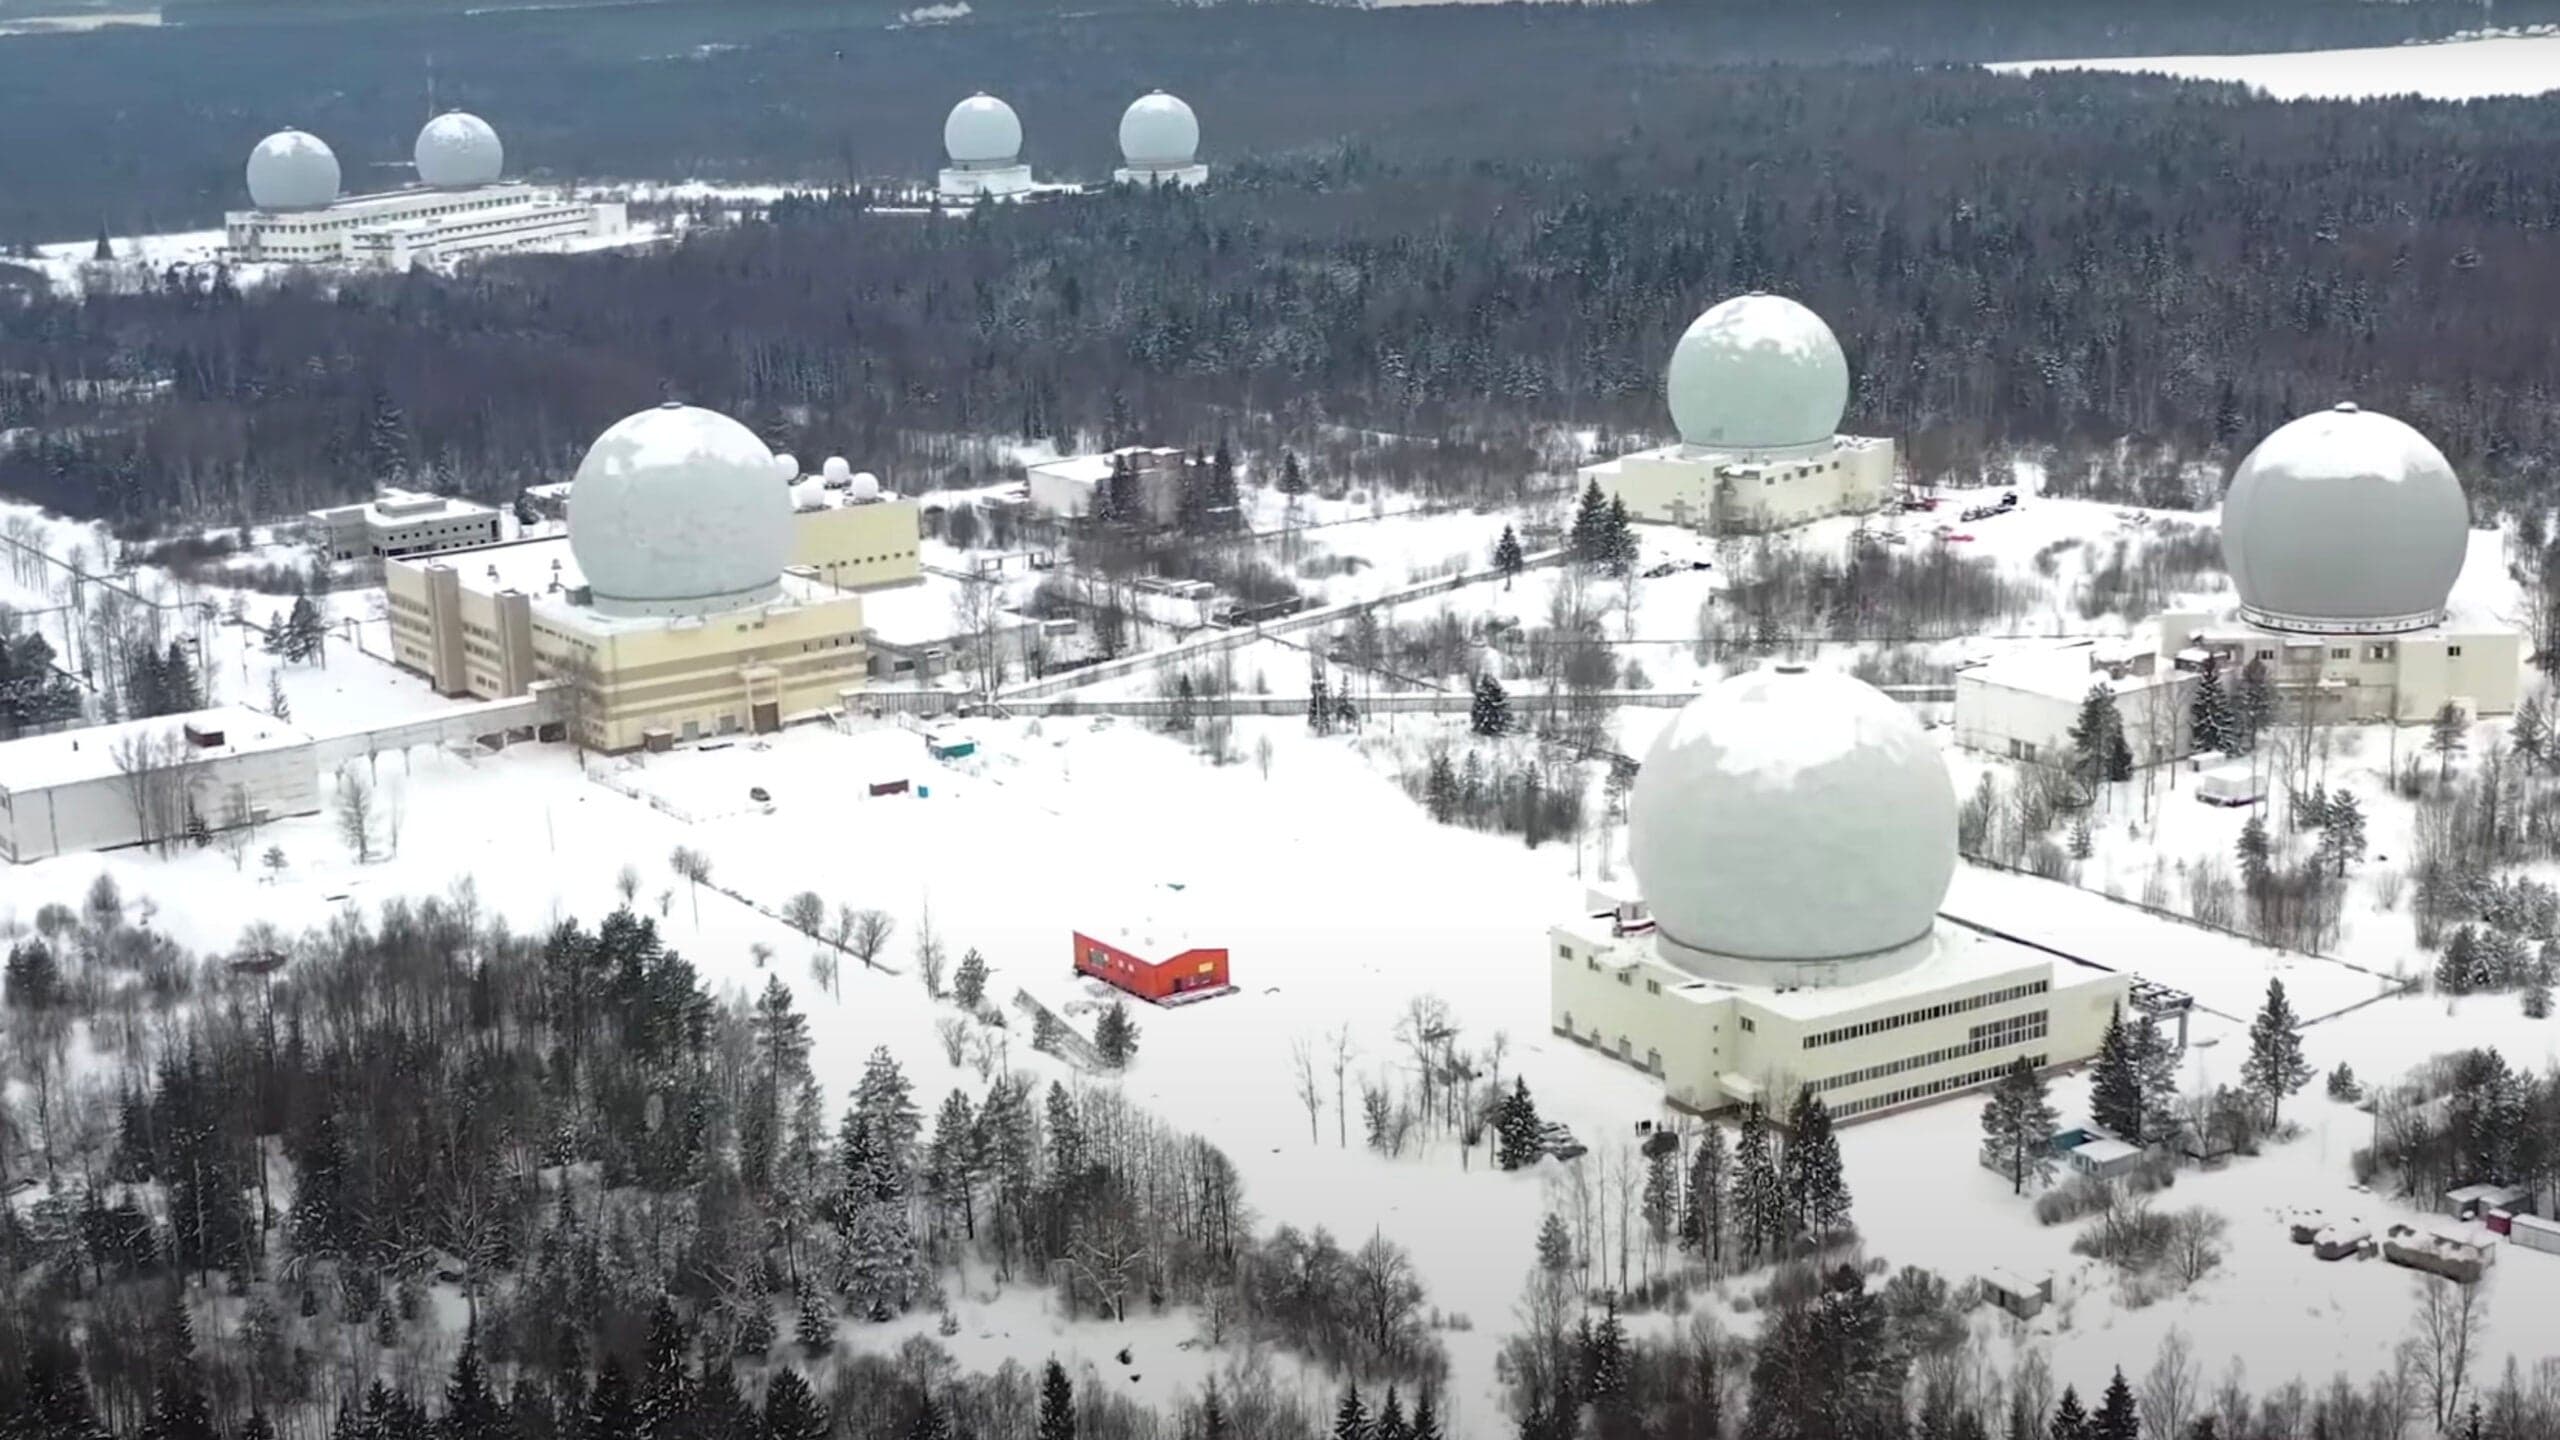 Take A Rare Look Inside Russia’s Doomsday Ballistic Missile Warning System